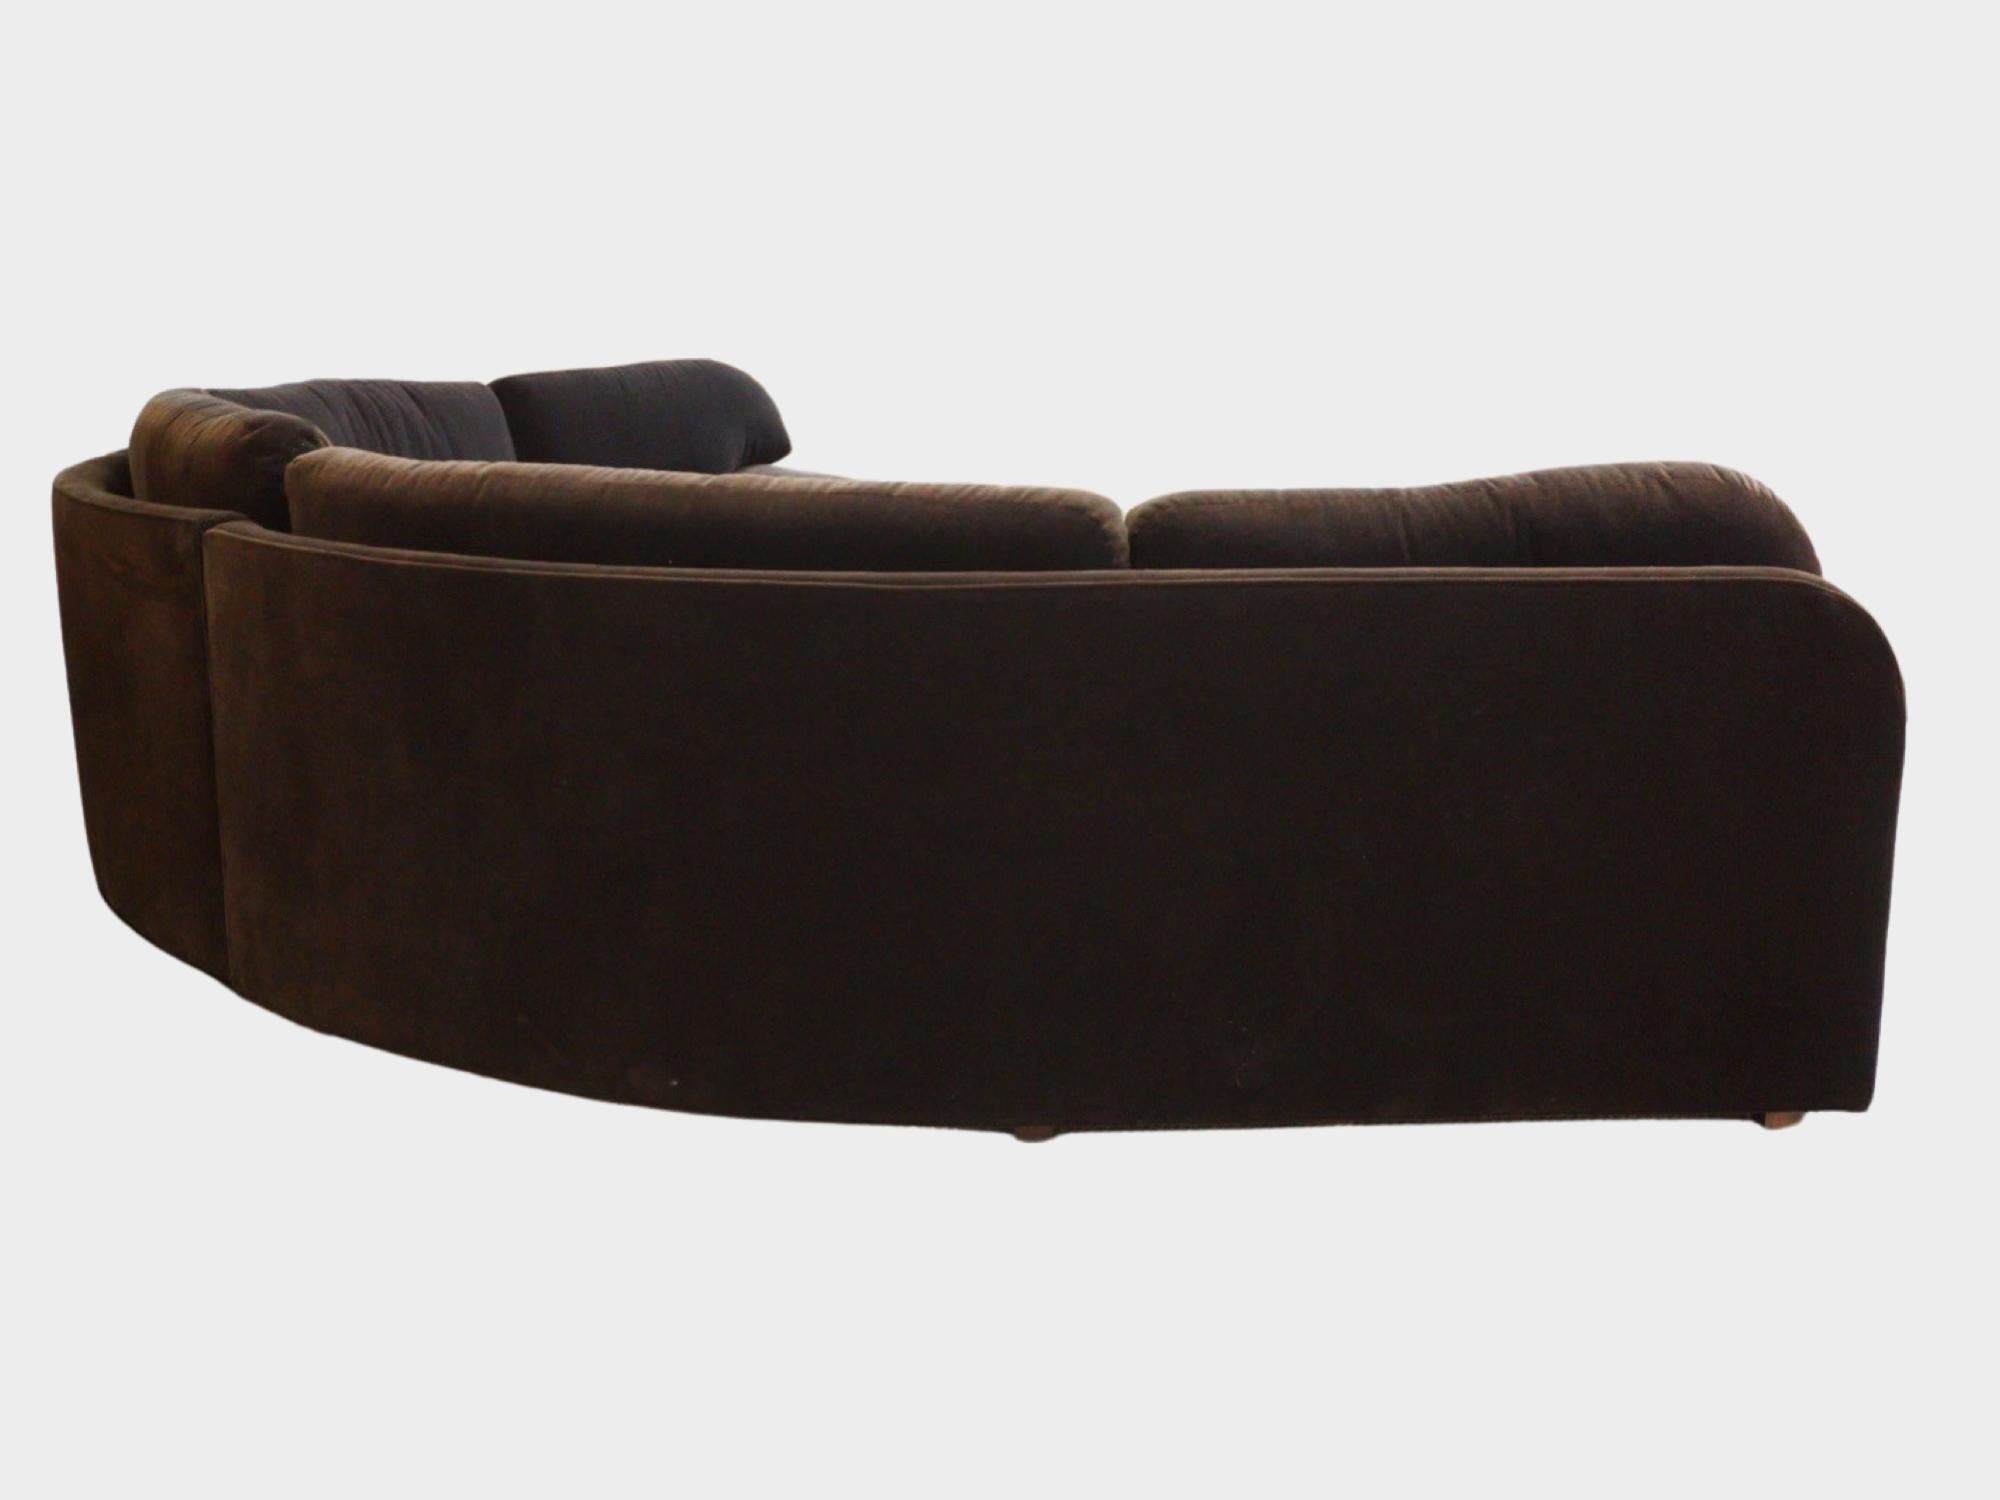 Imagine lounging on this colossal, Vladimir Kagan-inspired curved sectional, a masterpiece of the 1980s now reinvented with a lush brown velvet garb. Its audacious curves whisper of Kagan's genius, blending sculpture with function, while the velvet